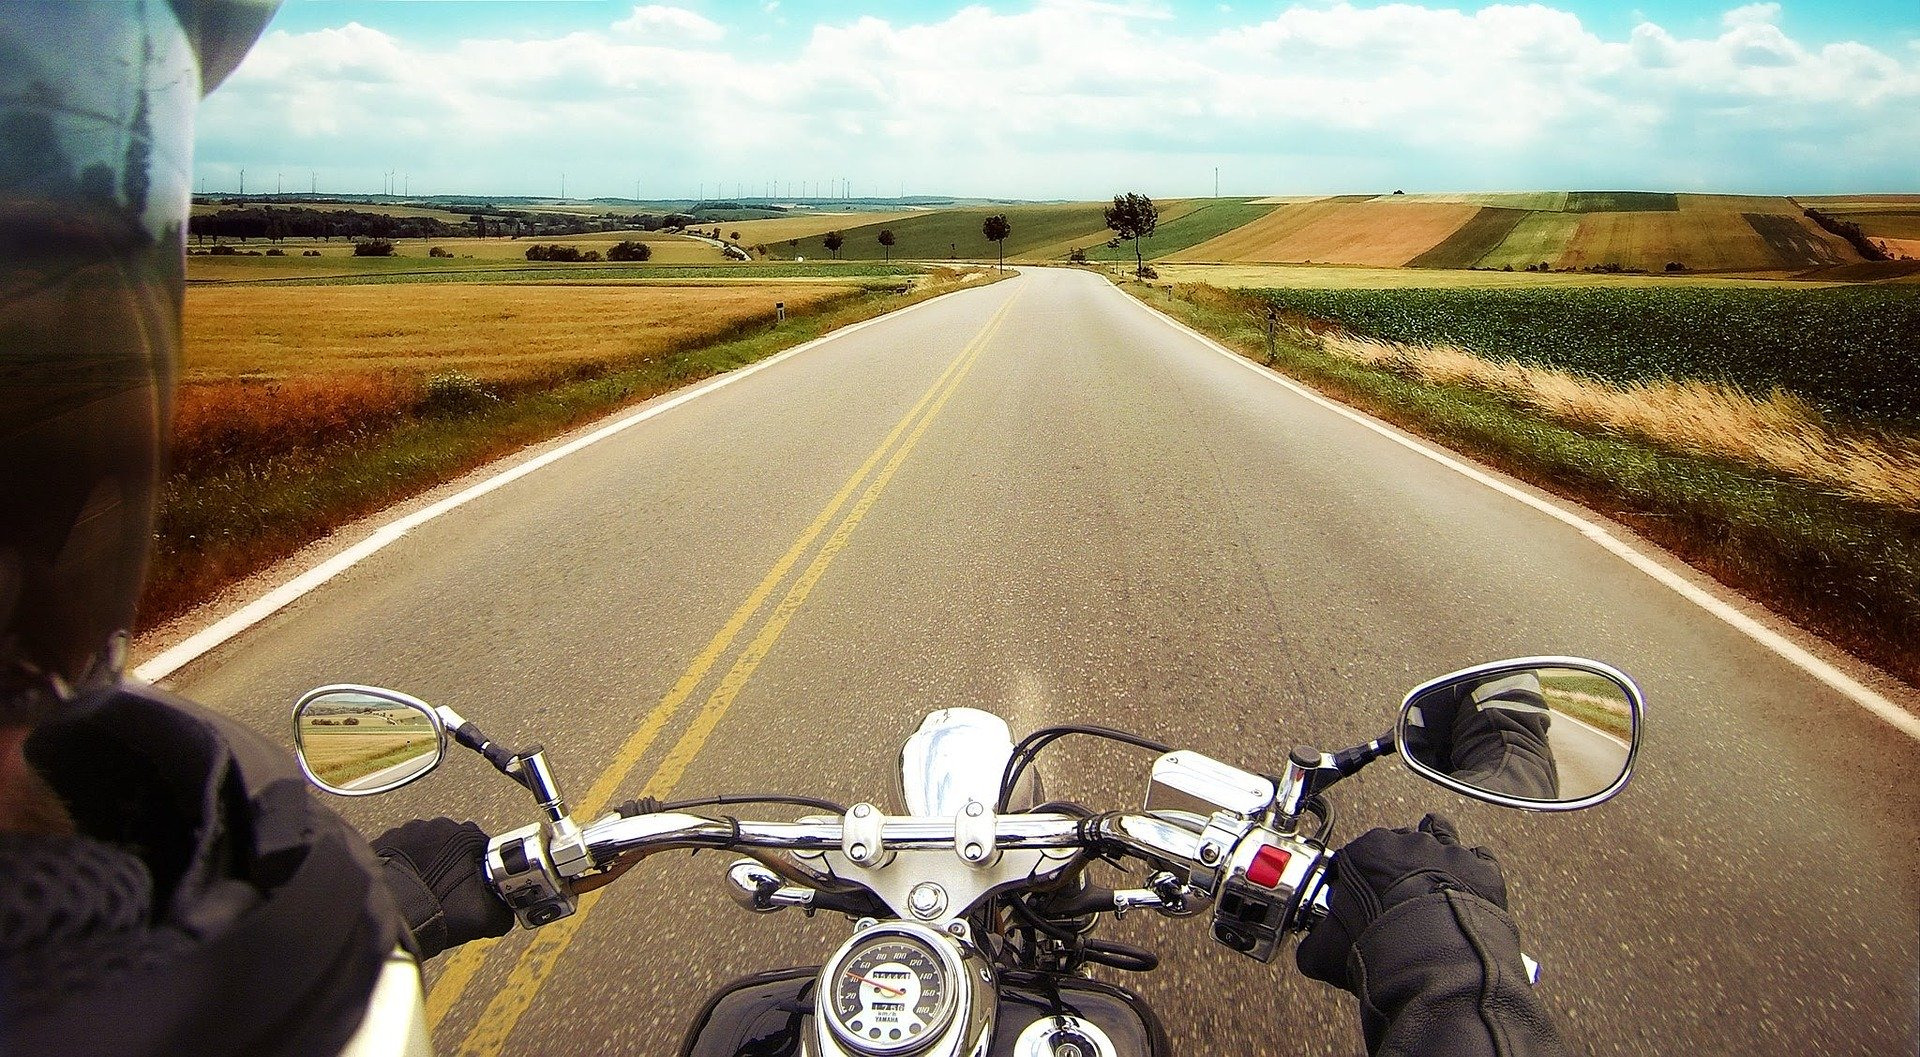 Everything you should check on your motorcycle before starting a trip